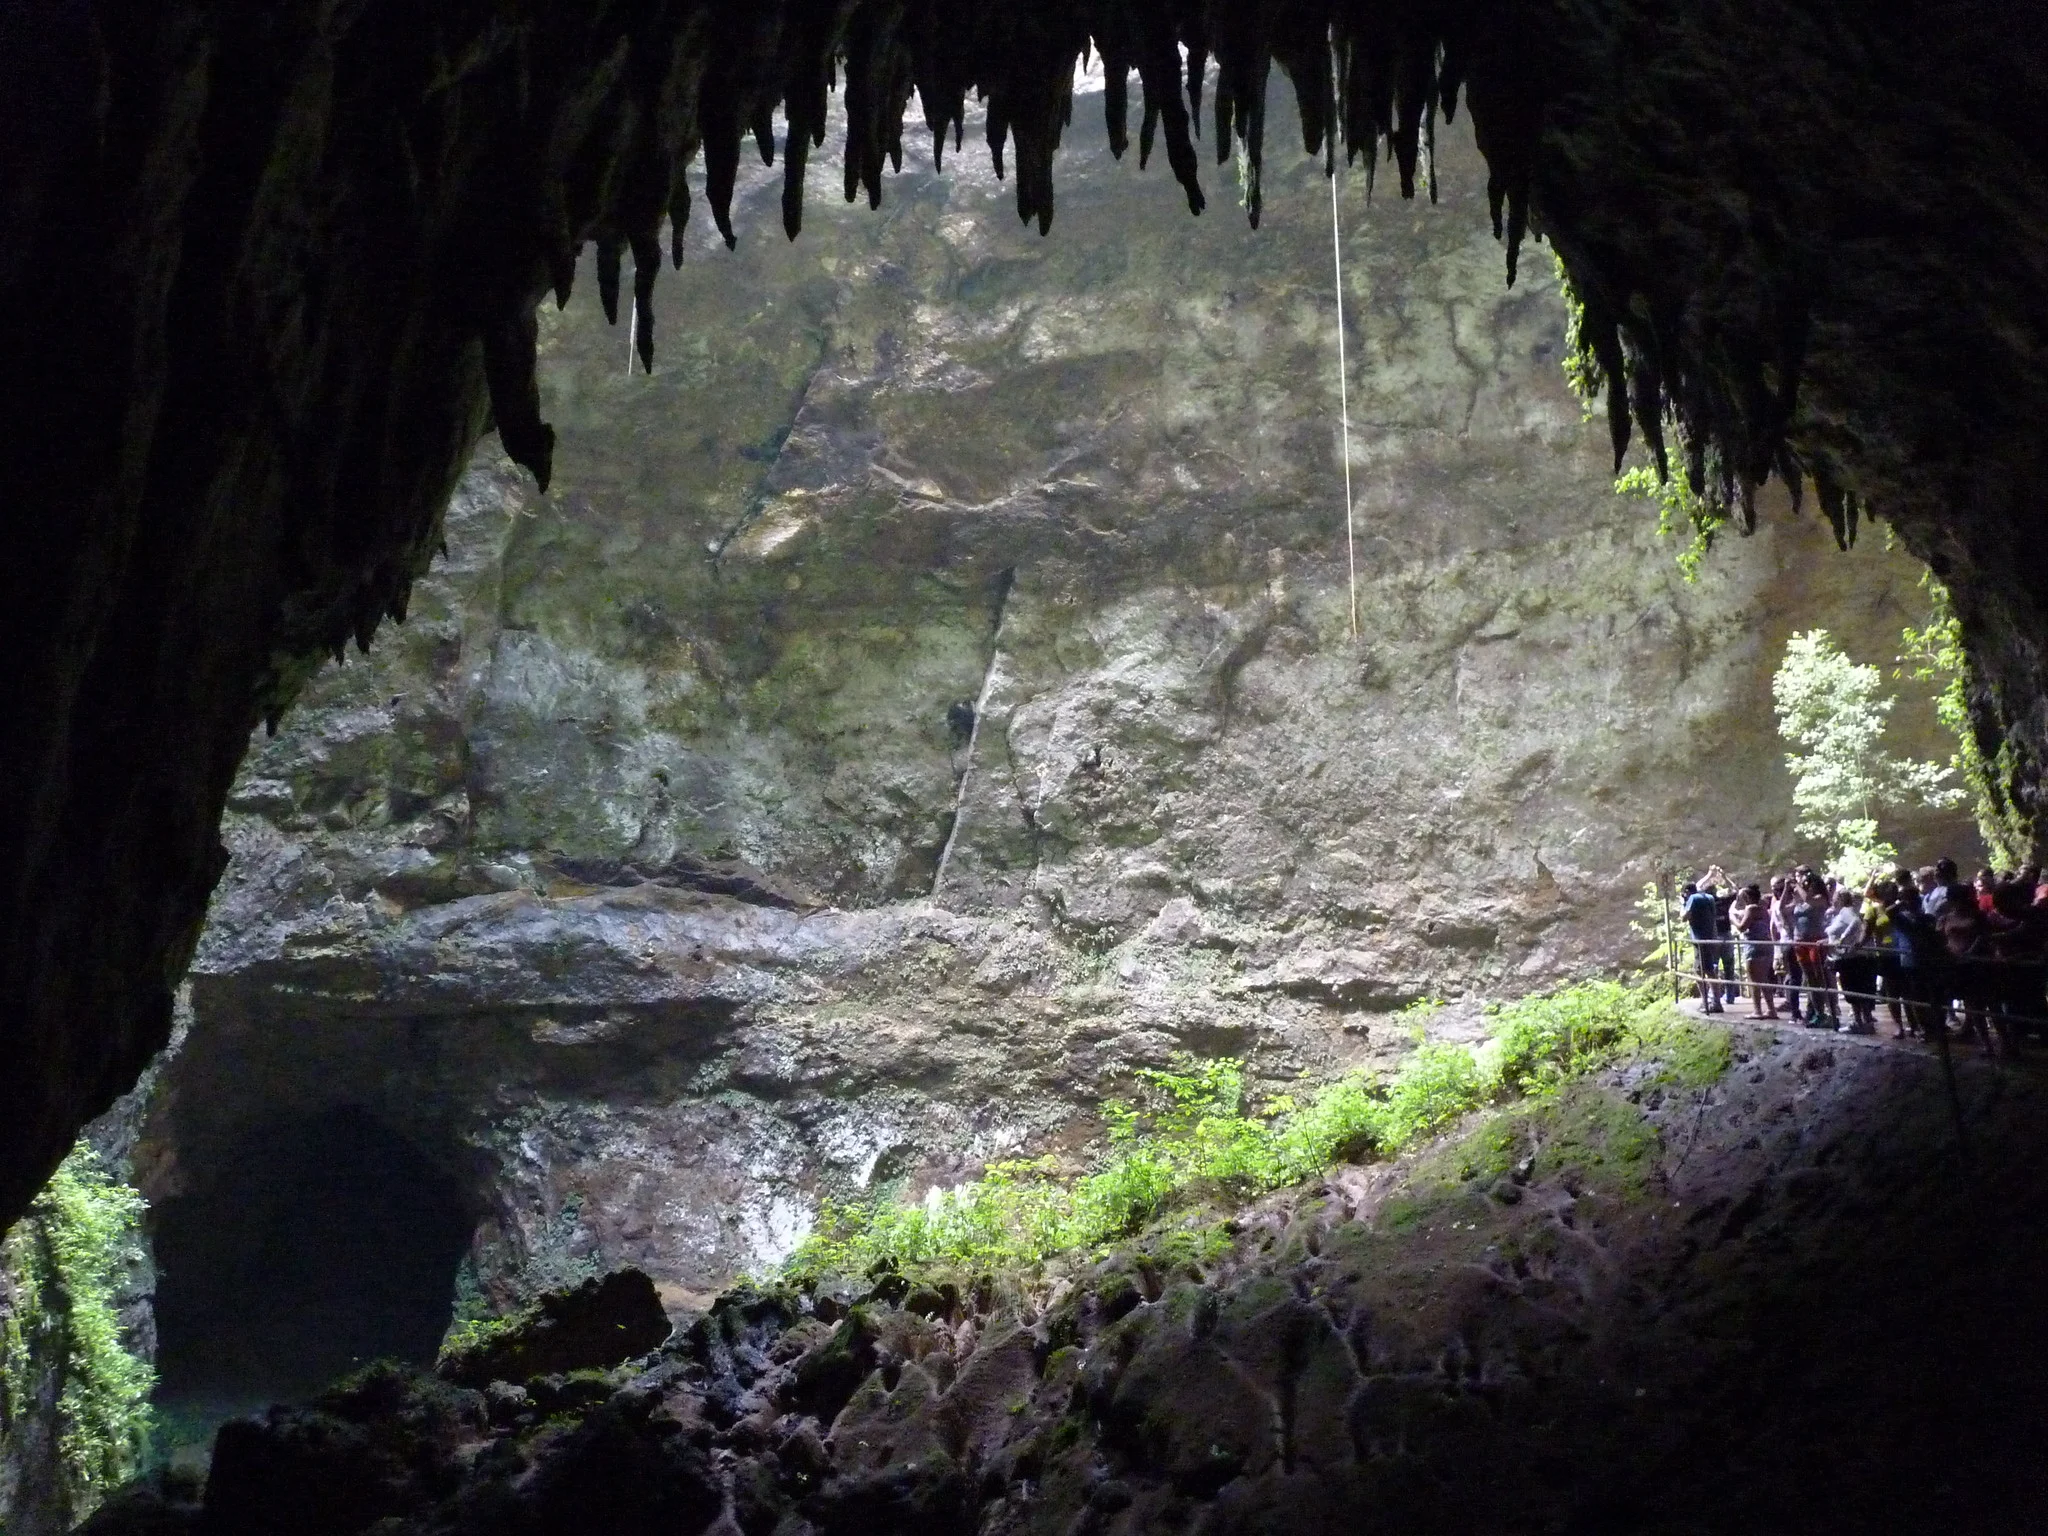 A number of tourists spectating a large sinkhole at Rio Camuy Caves, a piece on the best places to visit in Puerto Rico, with moss-covered rocks and rock formation at the ceiling of the cave